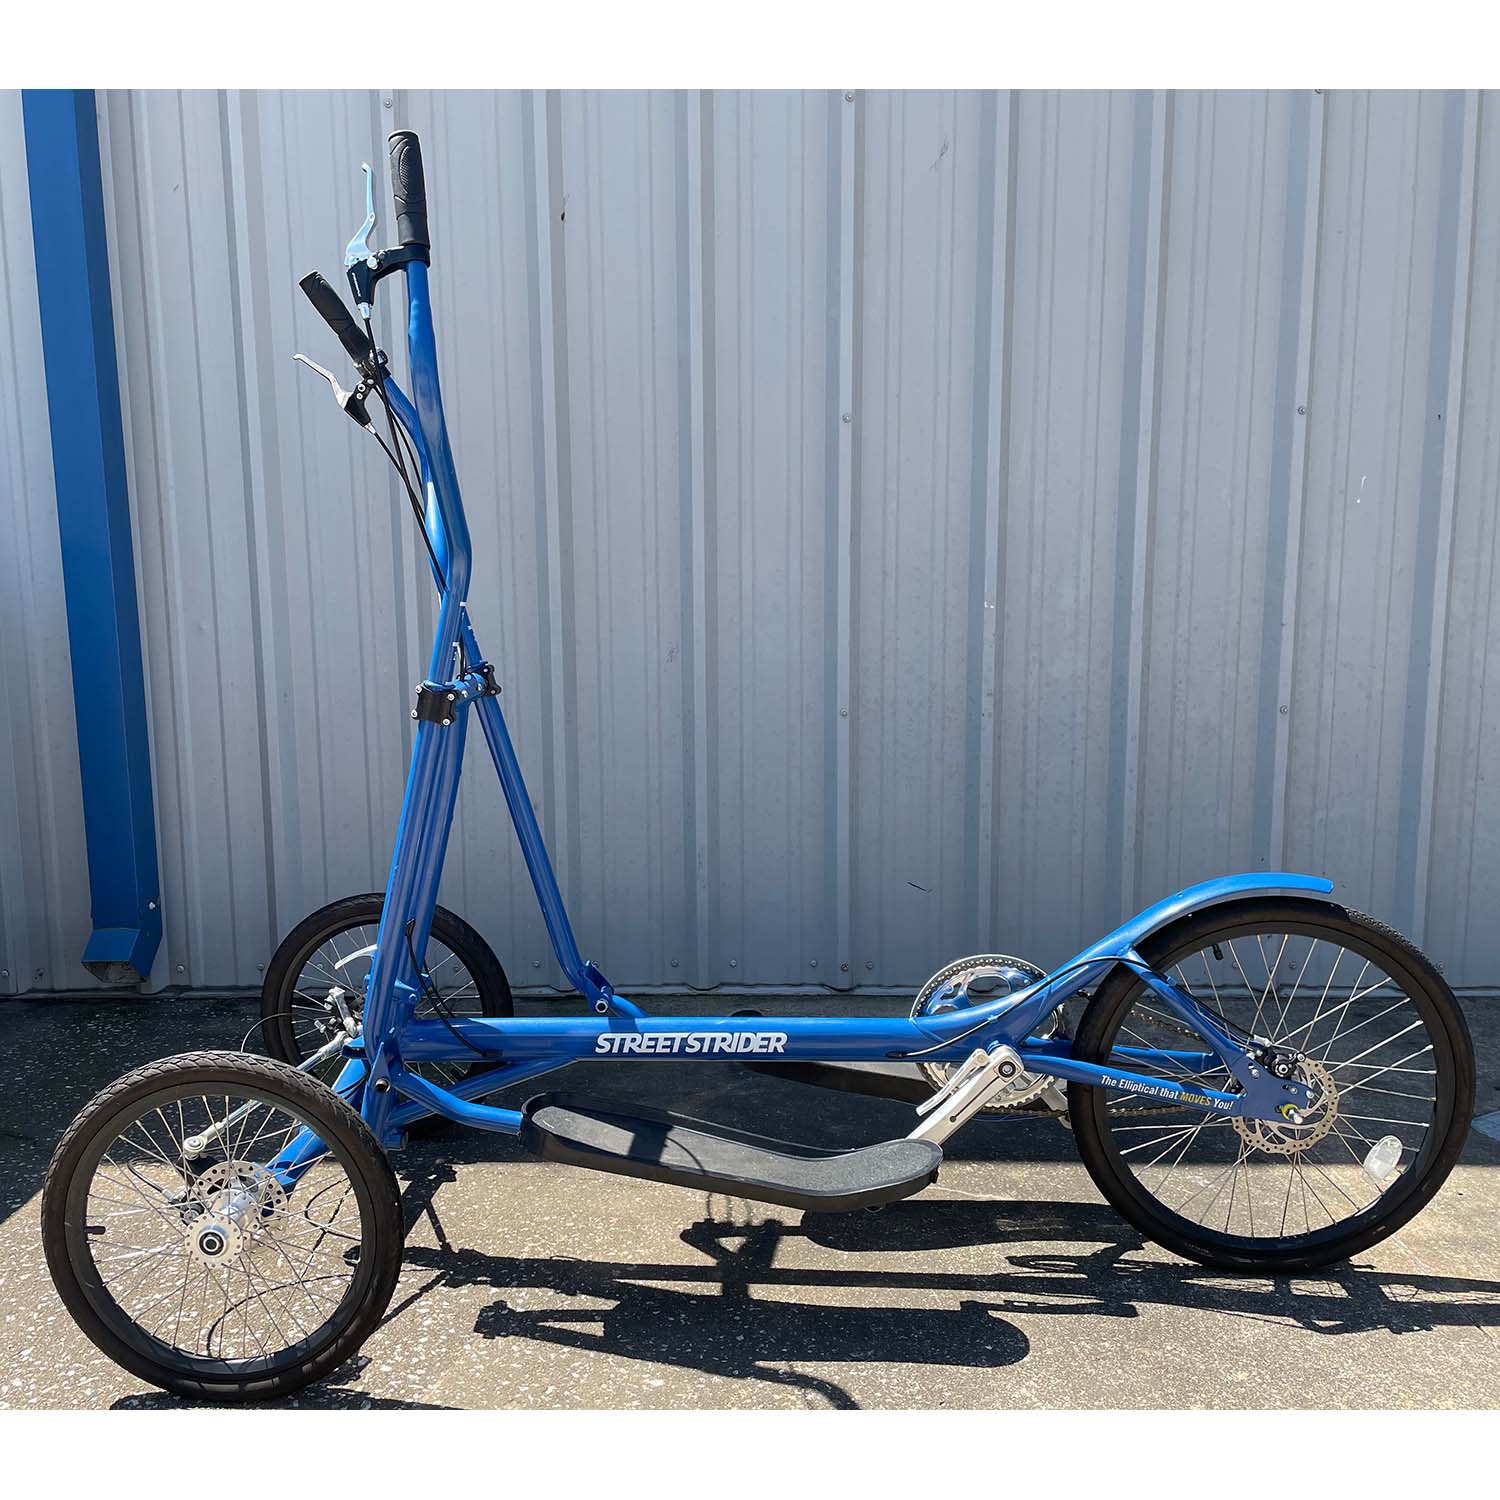 Pre-Owned Street Strider Elliptical, Blue, Bixby Bicycles, Oklahoma